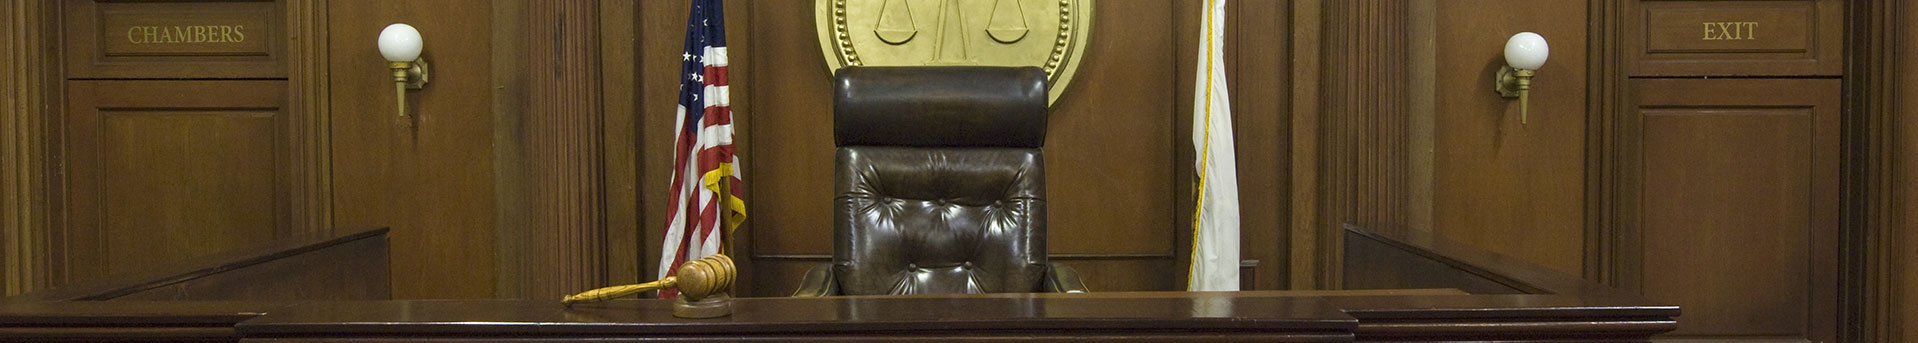 Courthouse, judges bench